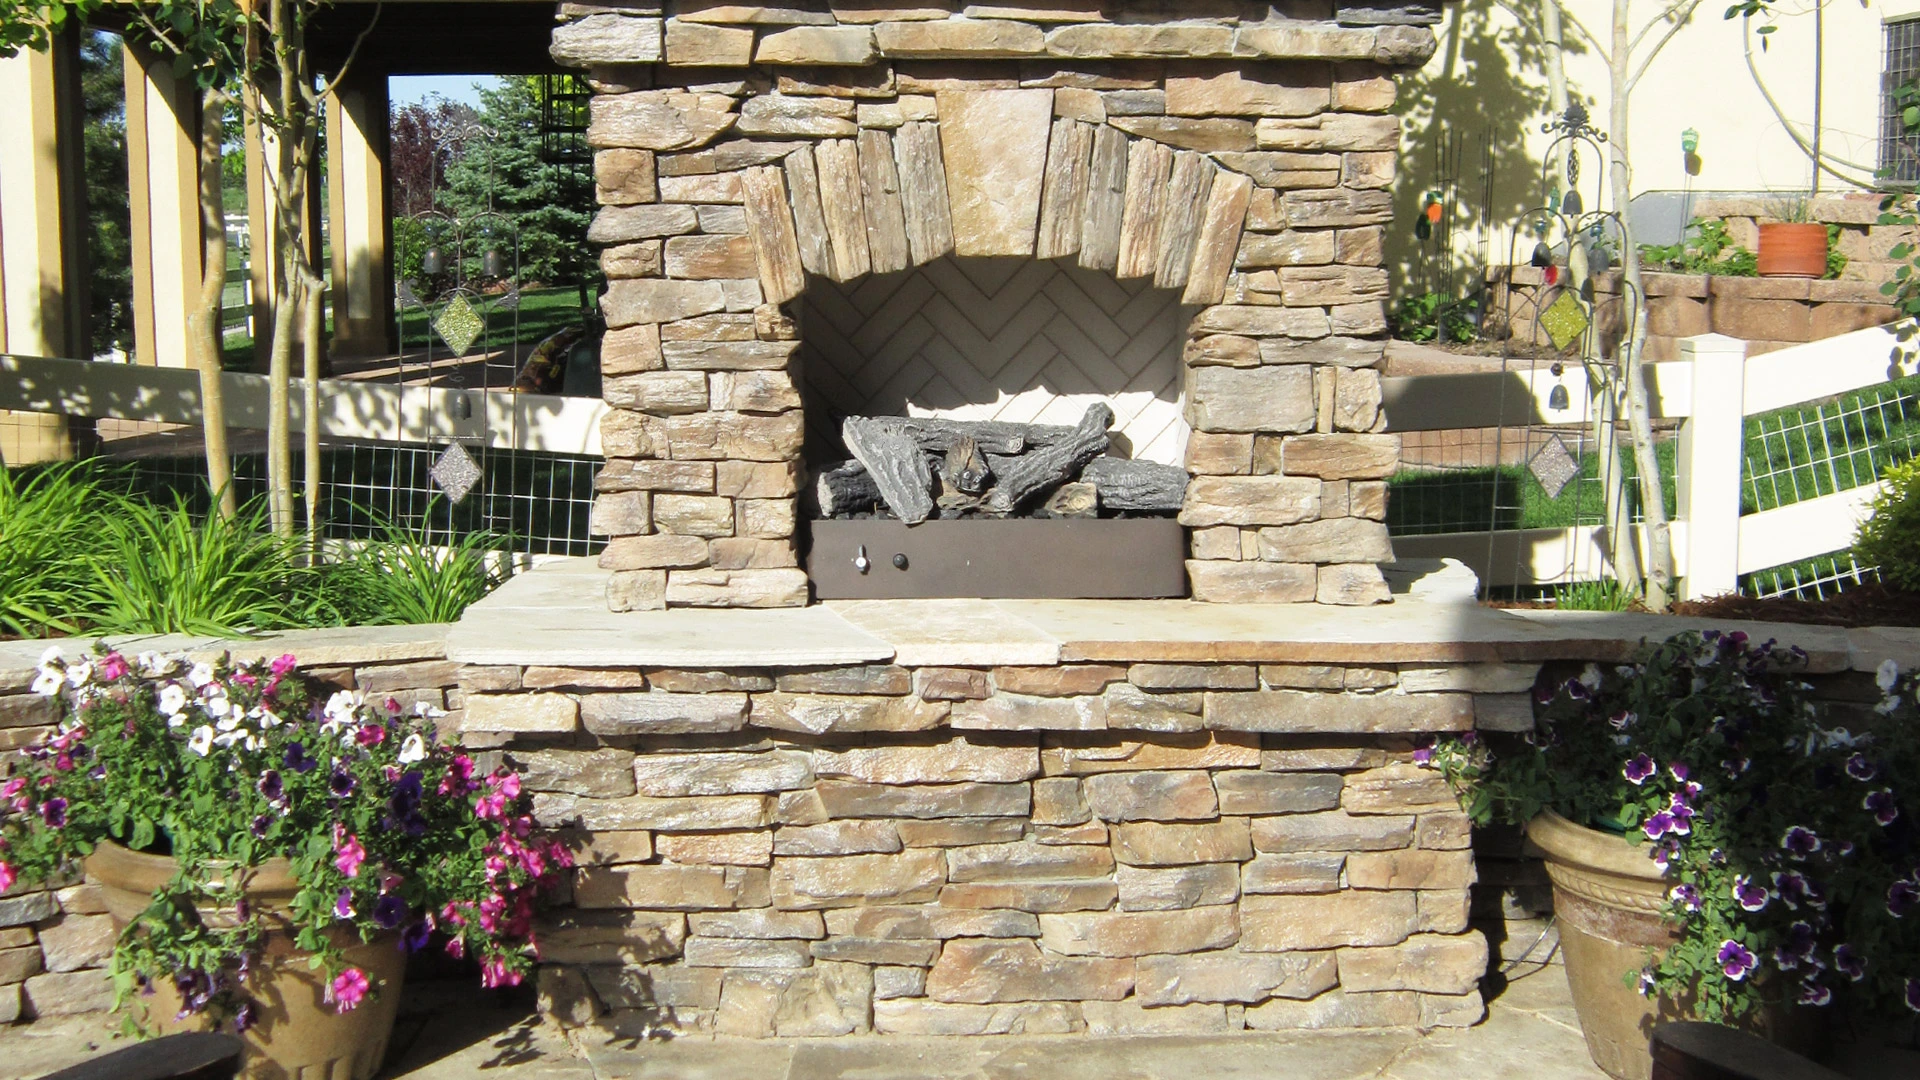 A brand new custom fireplace that was just installed in this homeowner's backyard in Greeley, CO.